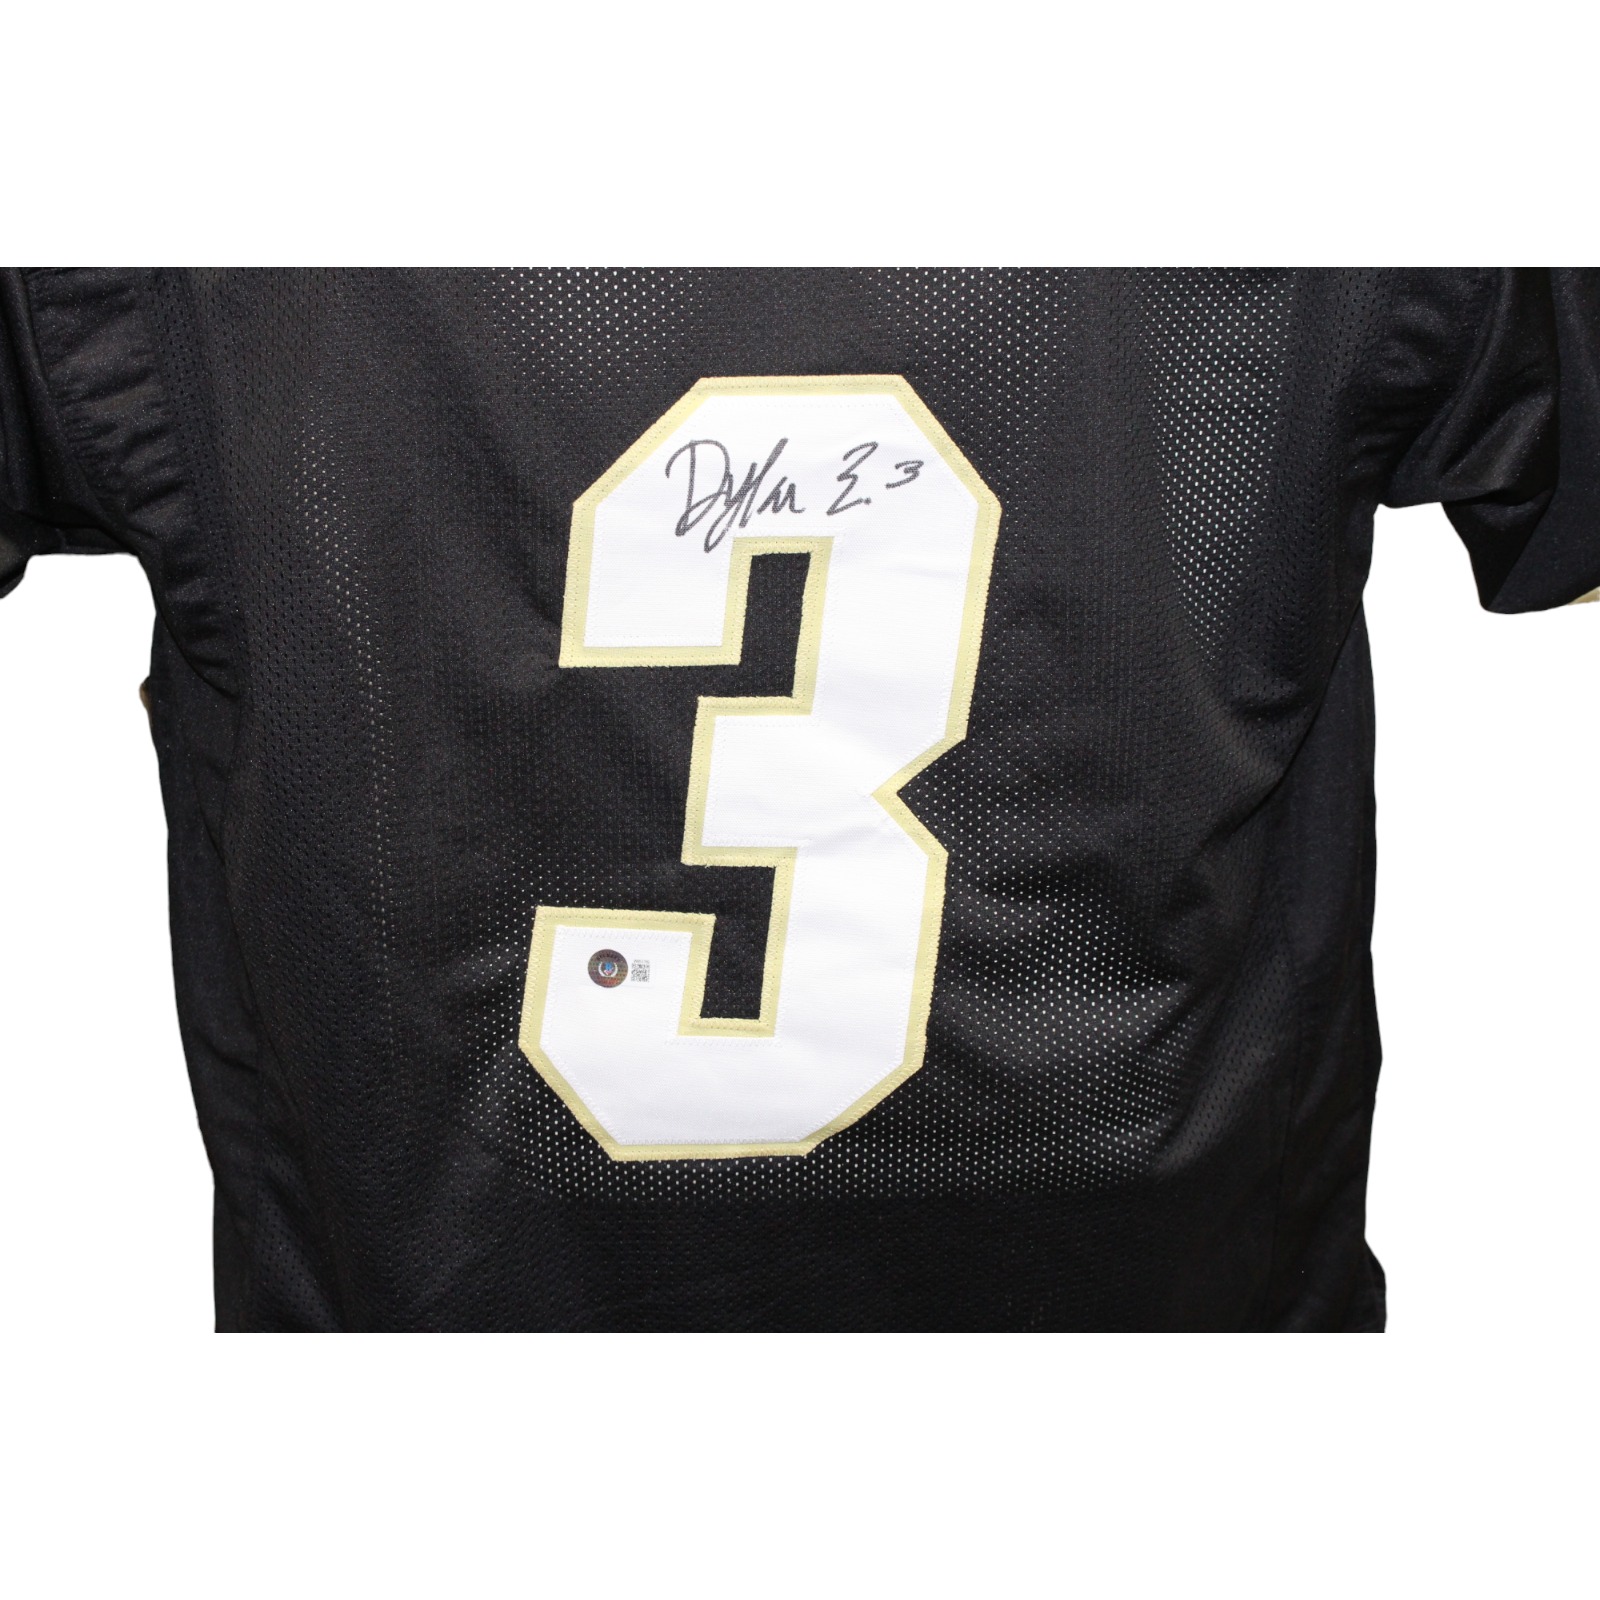 Dylan Edwards Autographed/Signed Black College Style Jersey BAS